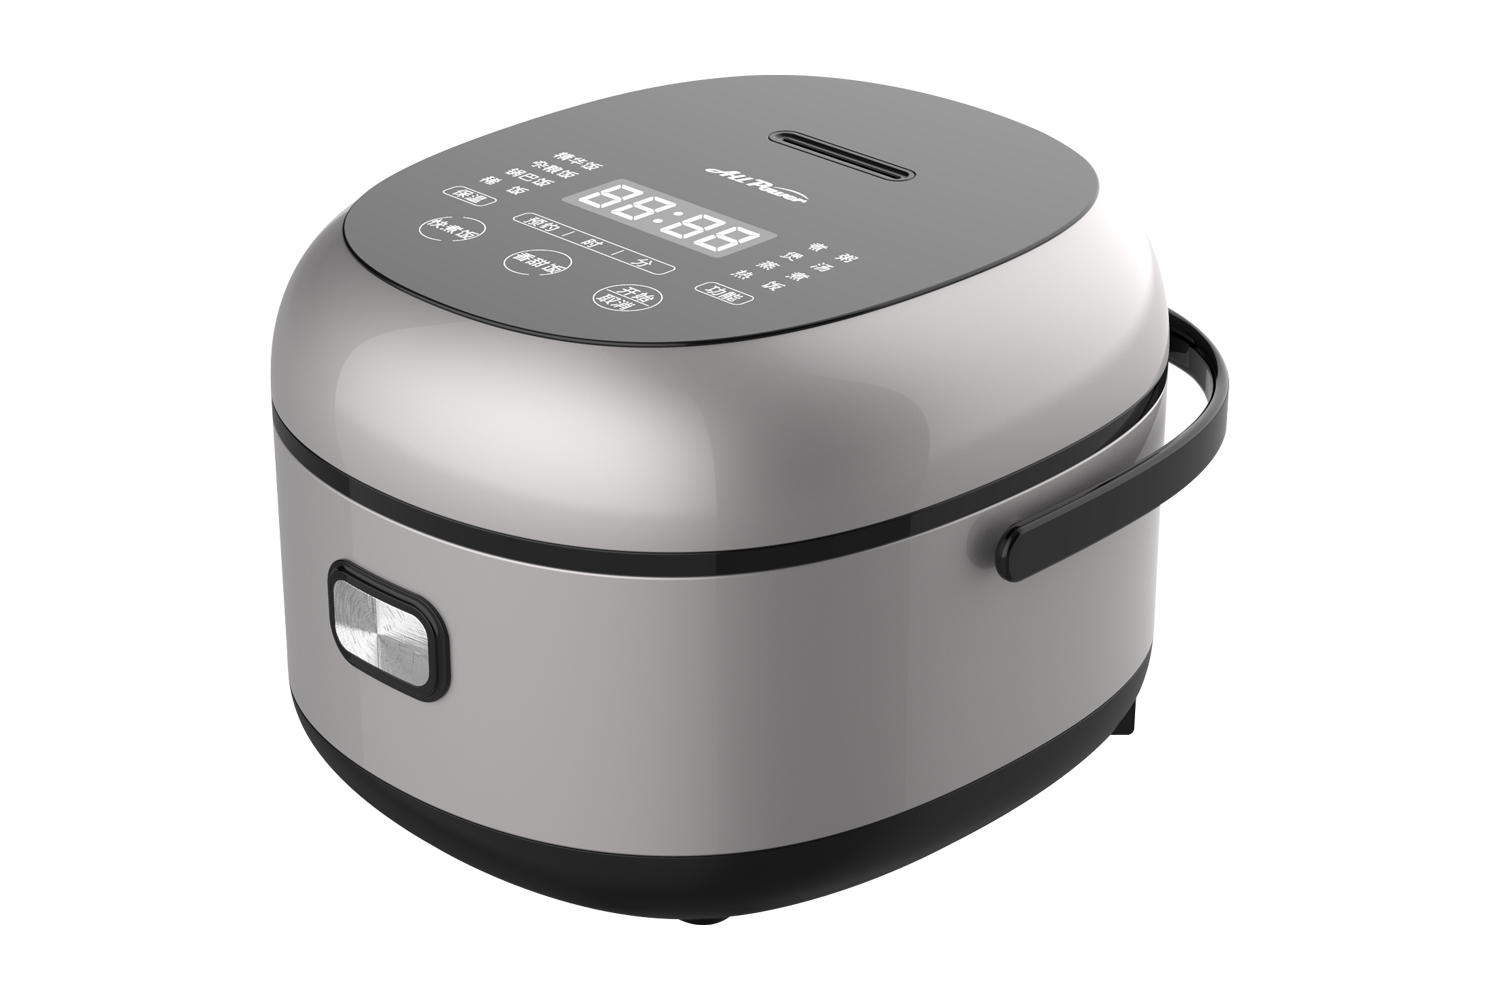 YYF-30FH01 3L Multifunction IH Rice Cooker, 10 Menu, 24 Hours Time Setting, Steam, Soup